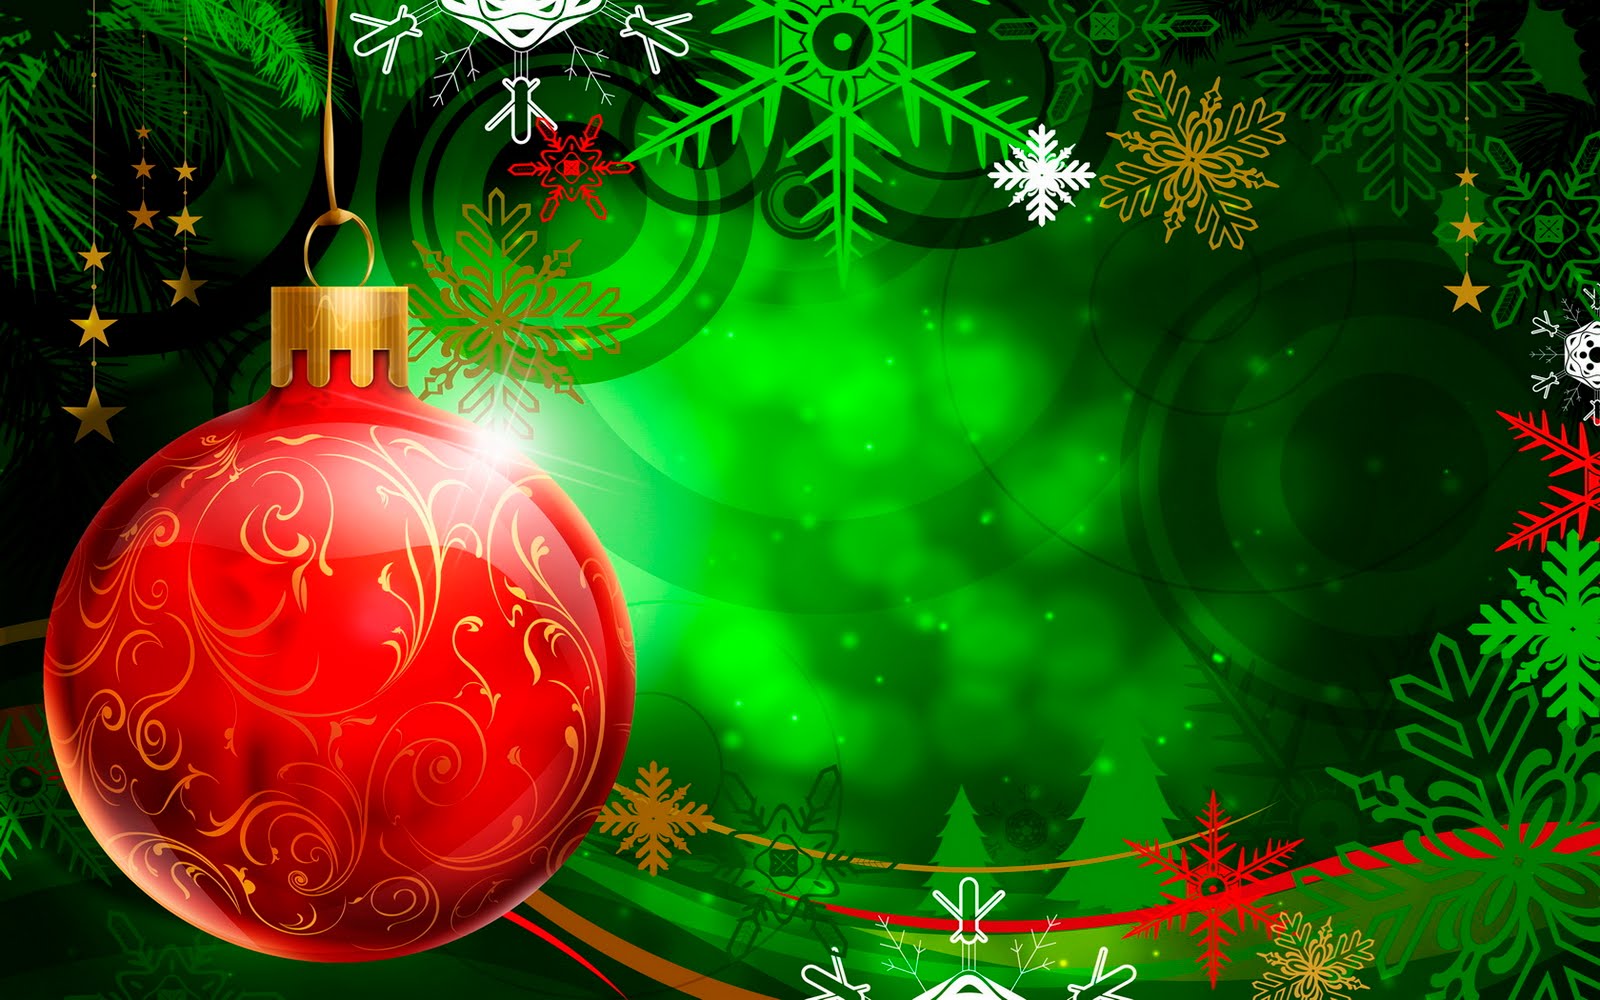 And Wallpapers free christmas wallpaper backgroundsfree christmas